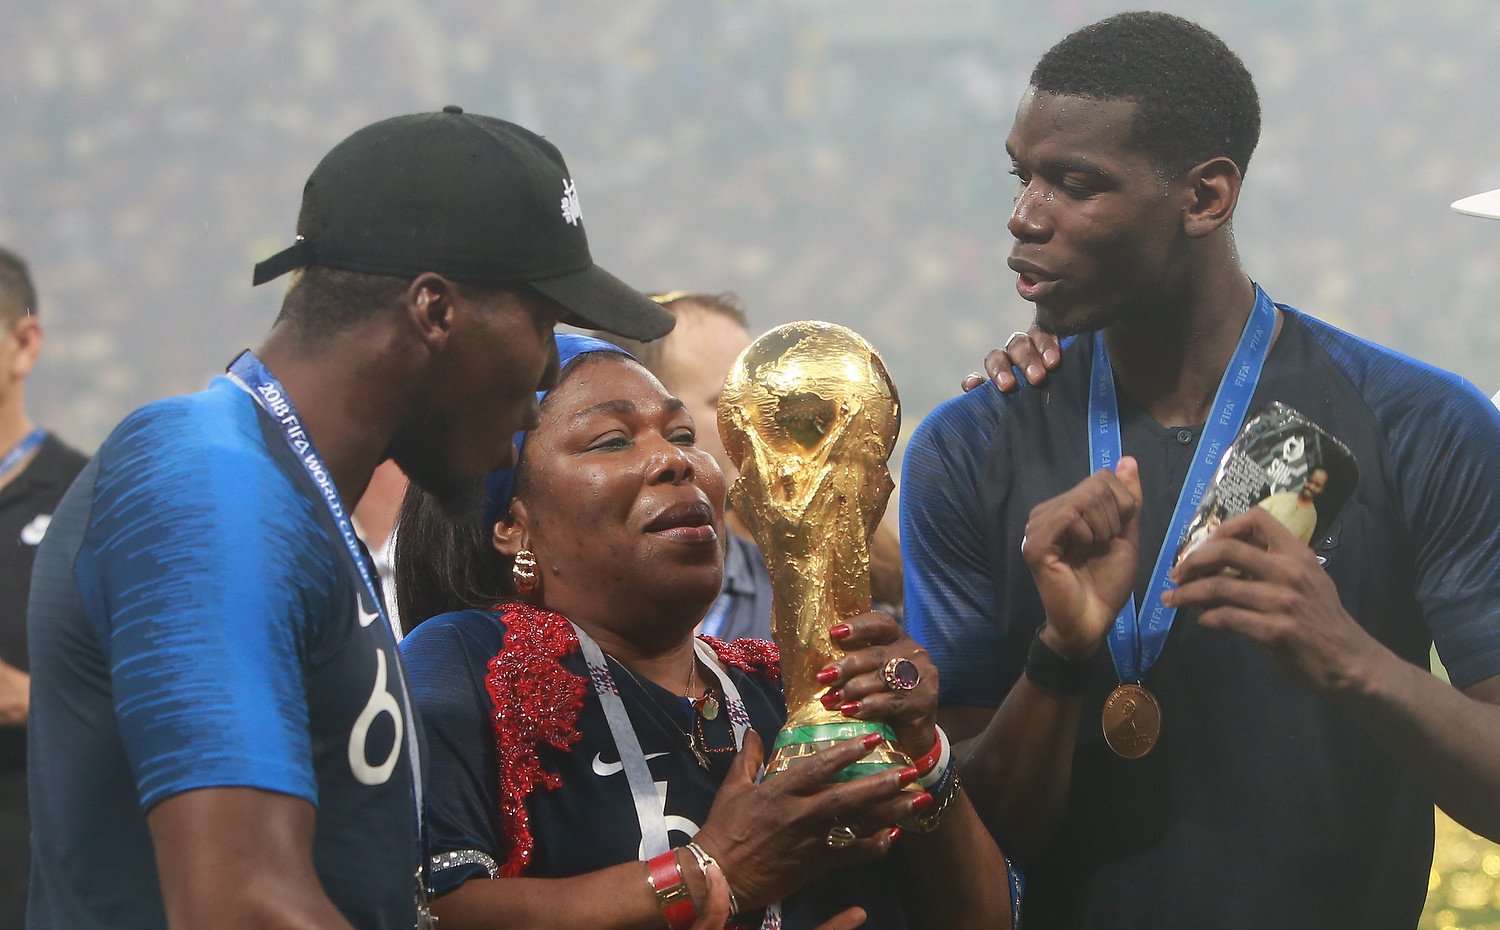 Soccer player, Paul Pogba with his mother, Yeo, and brother, Florentin, holding the world cup trophy. | Photo: Anton Zaitsev, CC BY-SA 3.0, Wikimedia Commons.